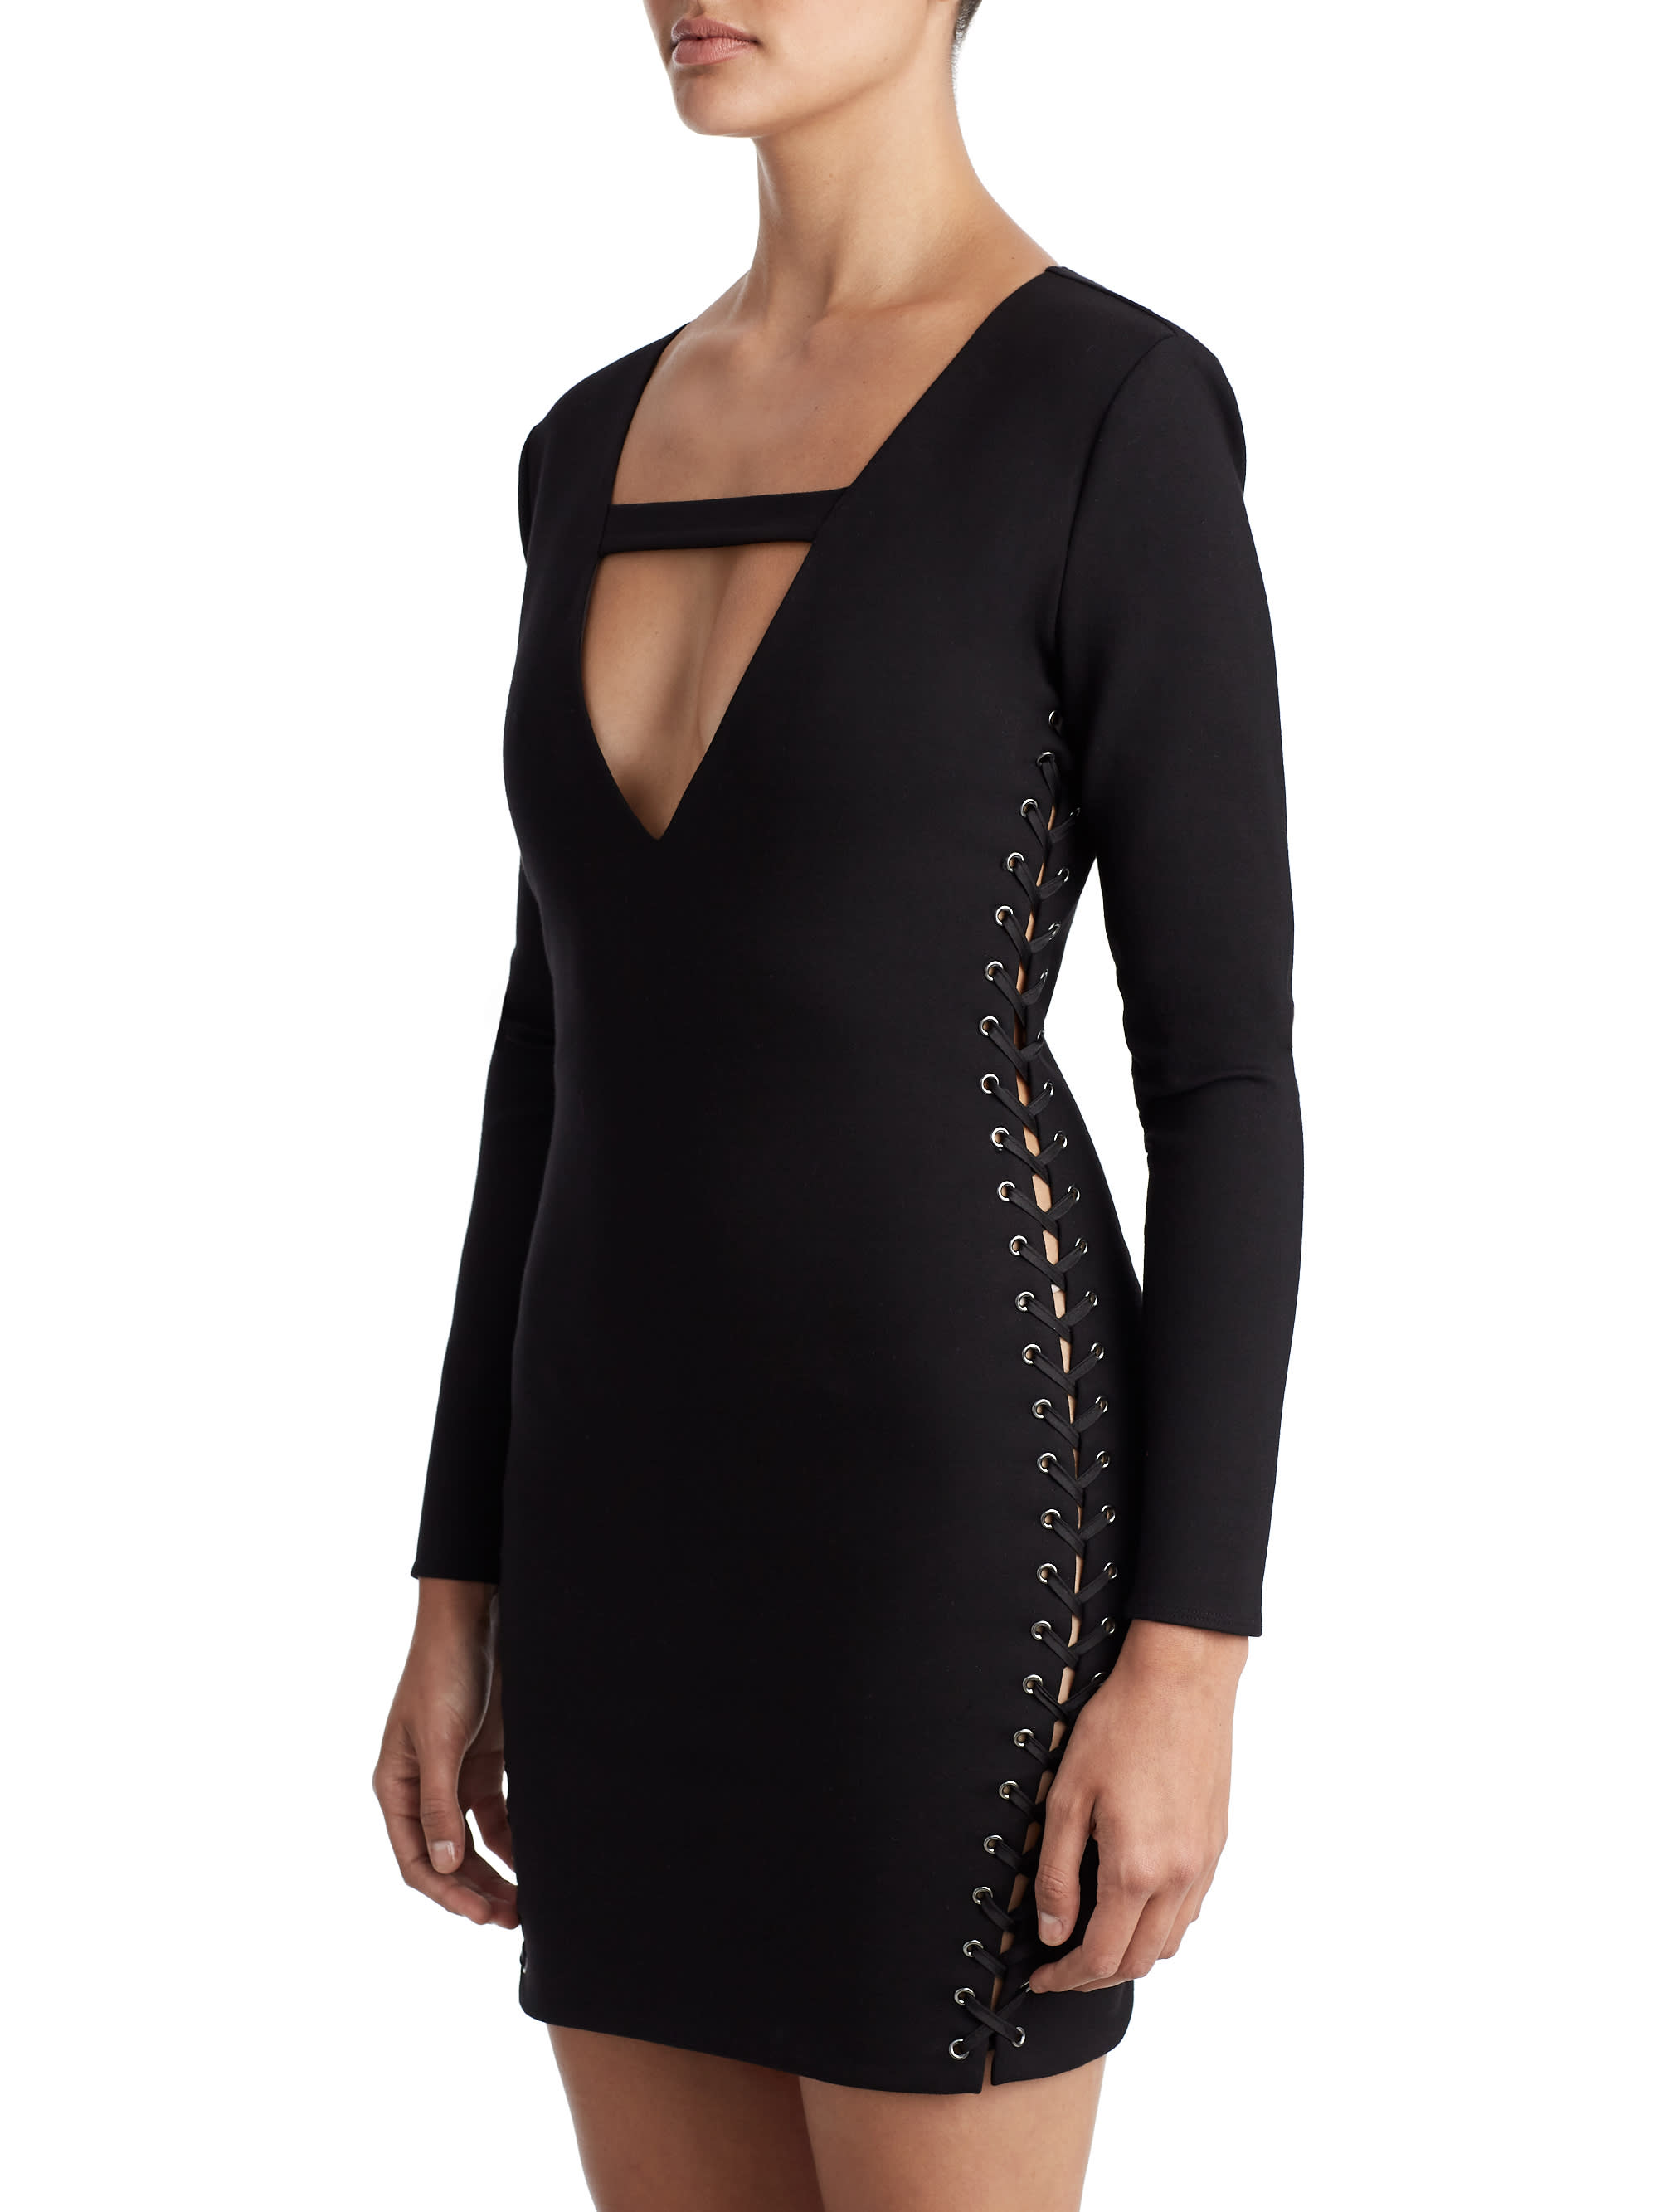 WOMENS SUPER DEEP V LACE UP BODYCON DRESS